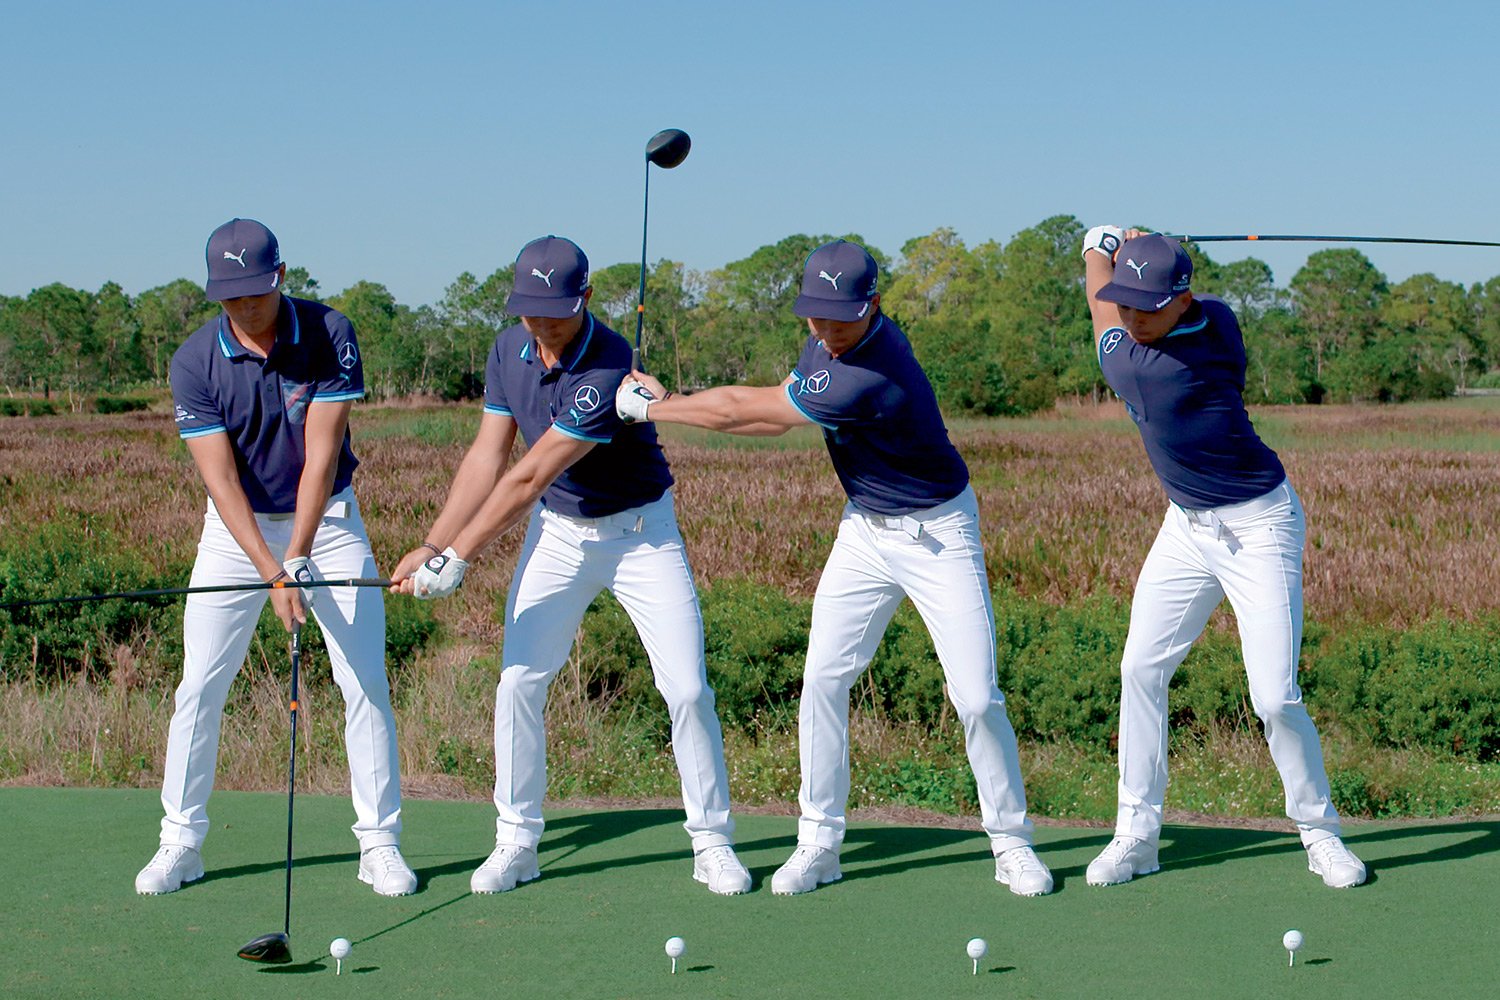 Golf Swing Sequence Explained Aneka Golf